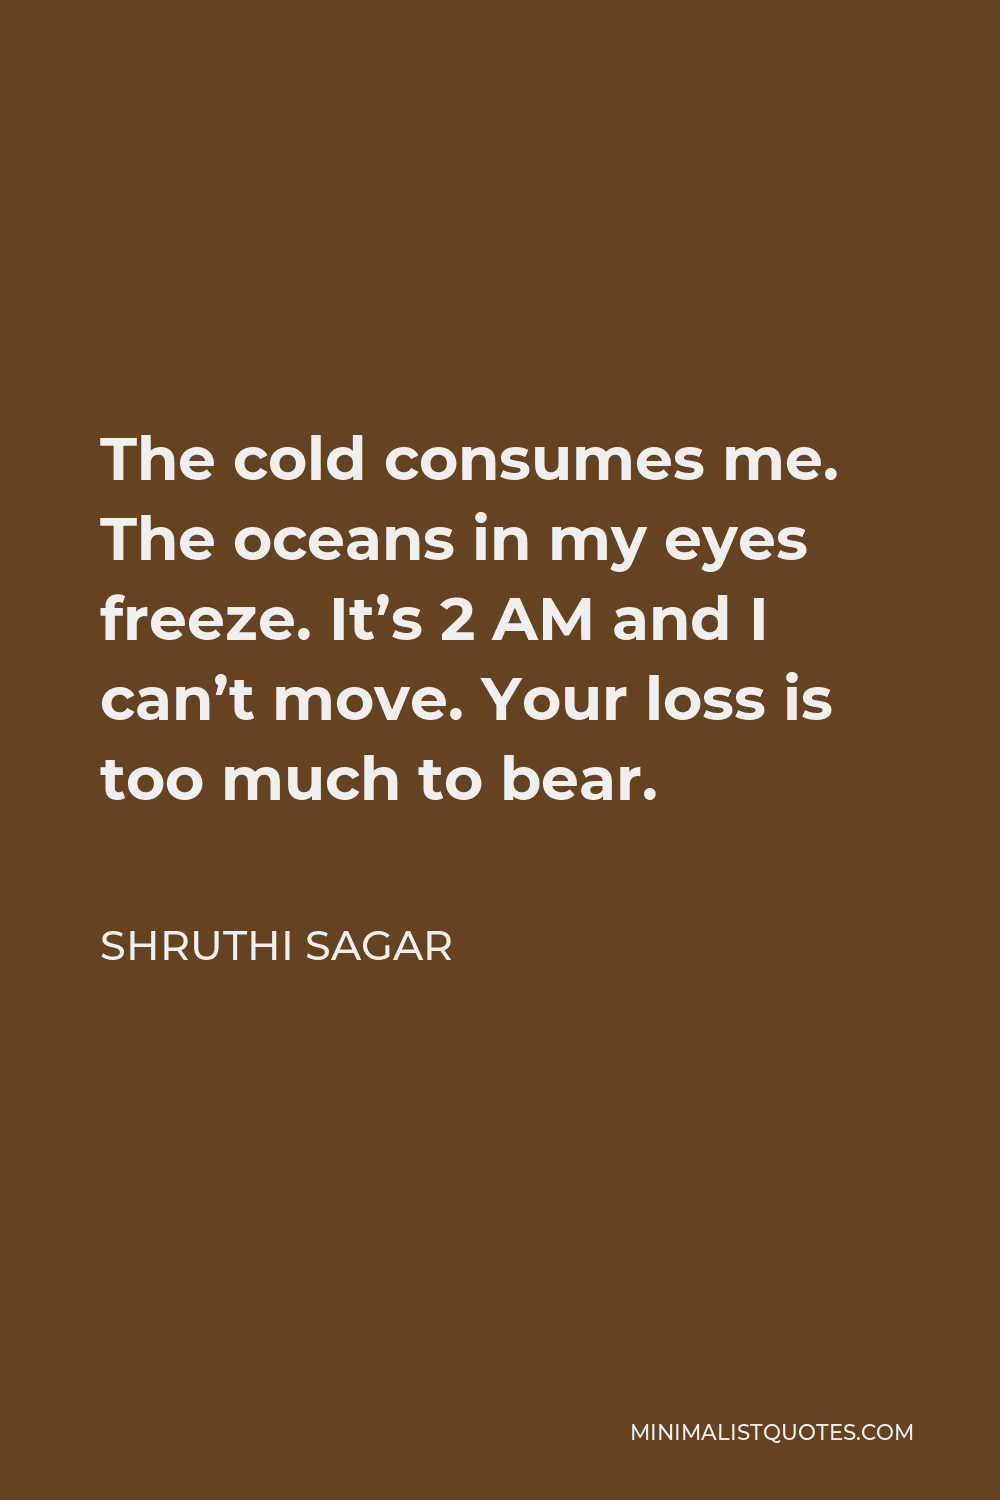 Shruthi Sagar Quote - The cold consumes me. The oceans in my eyes freeze. It’s 2 AM and I can’t move. Your loss is too much to bear.